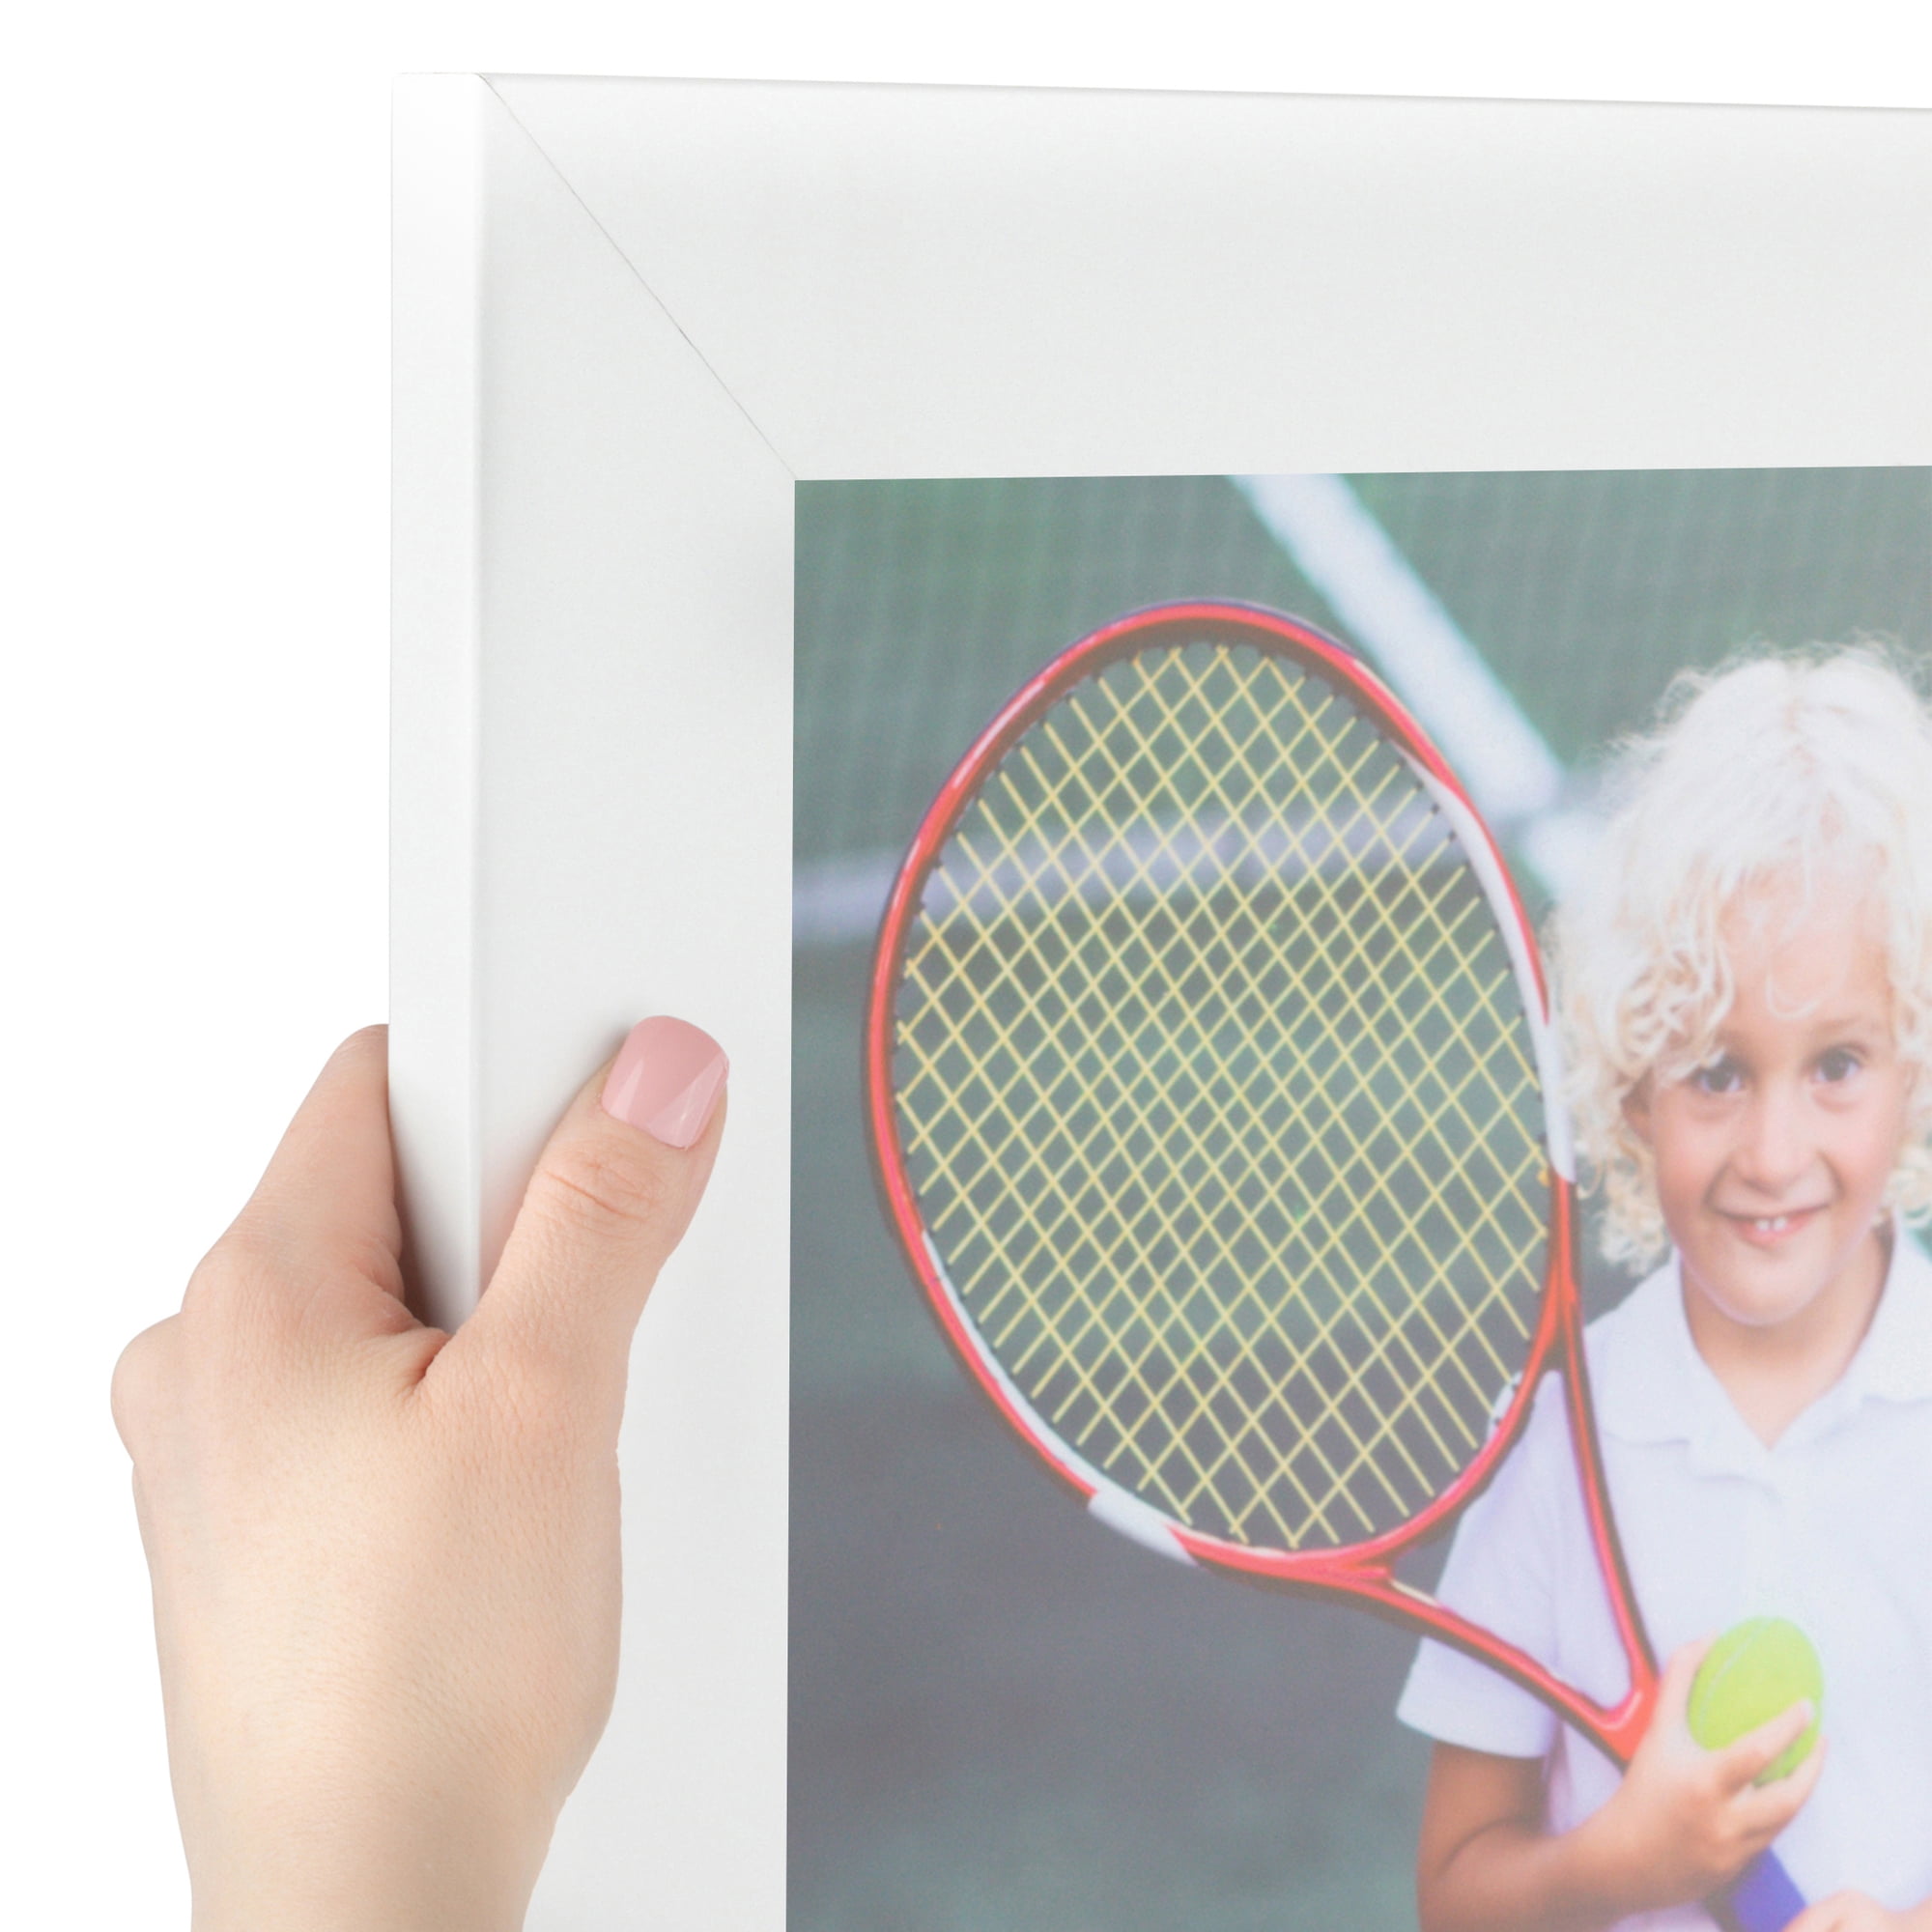 4×6-inch 2-14 Opening White Picture Frame